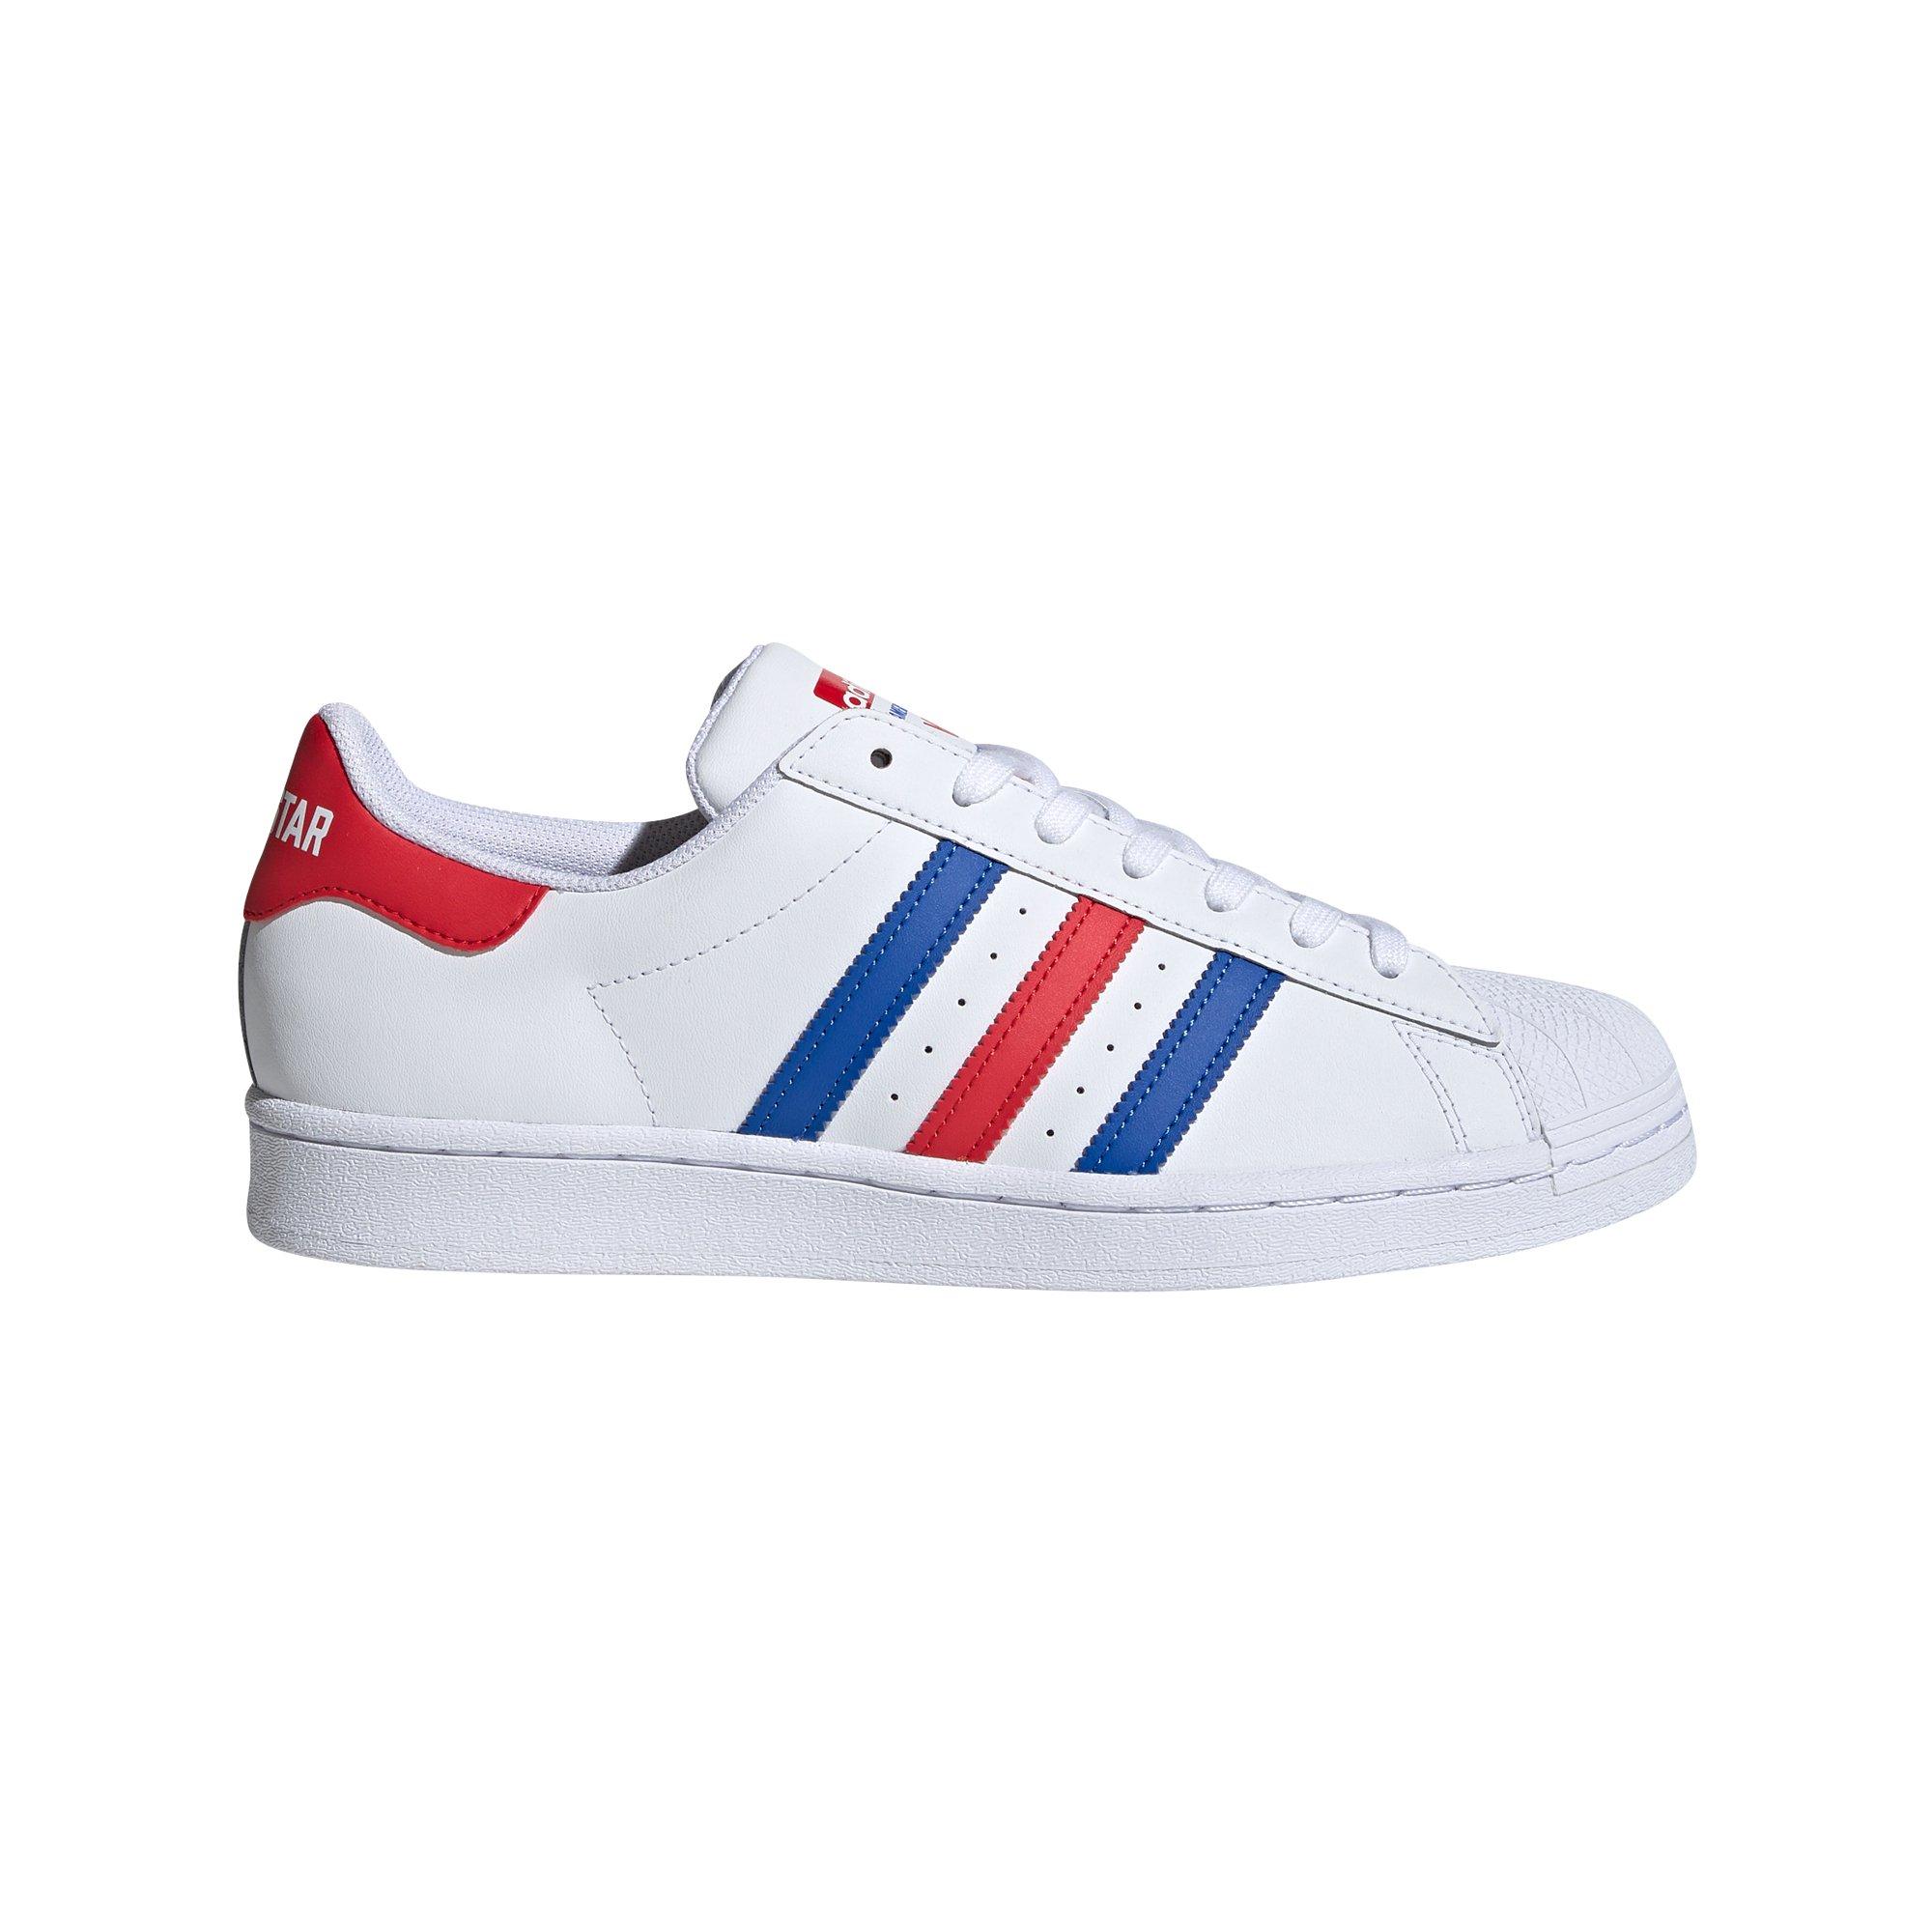 adidas shoes clearance sale online